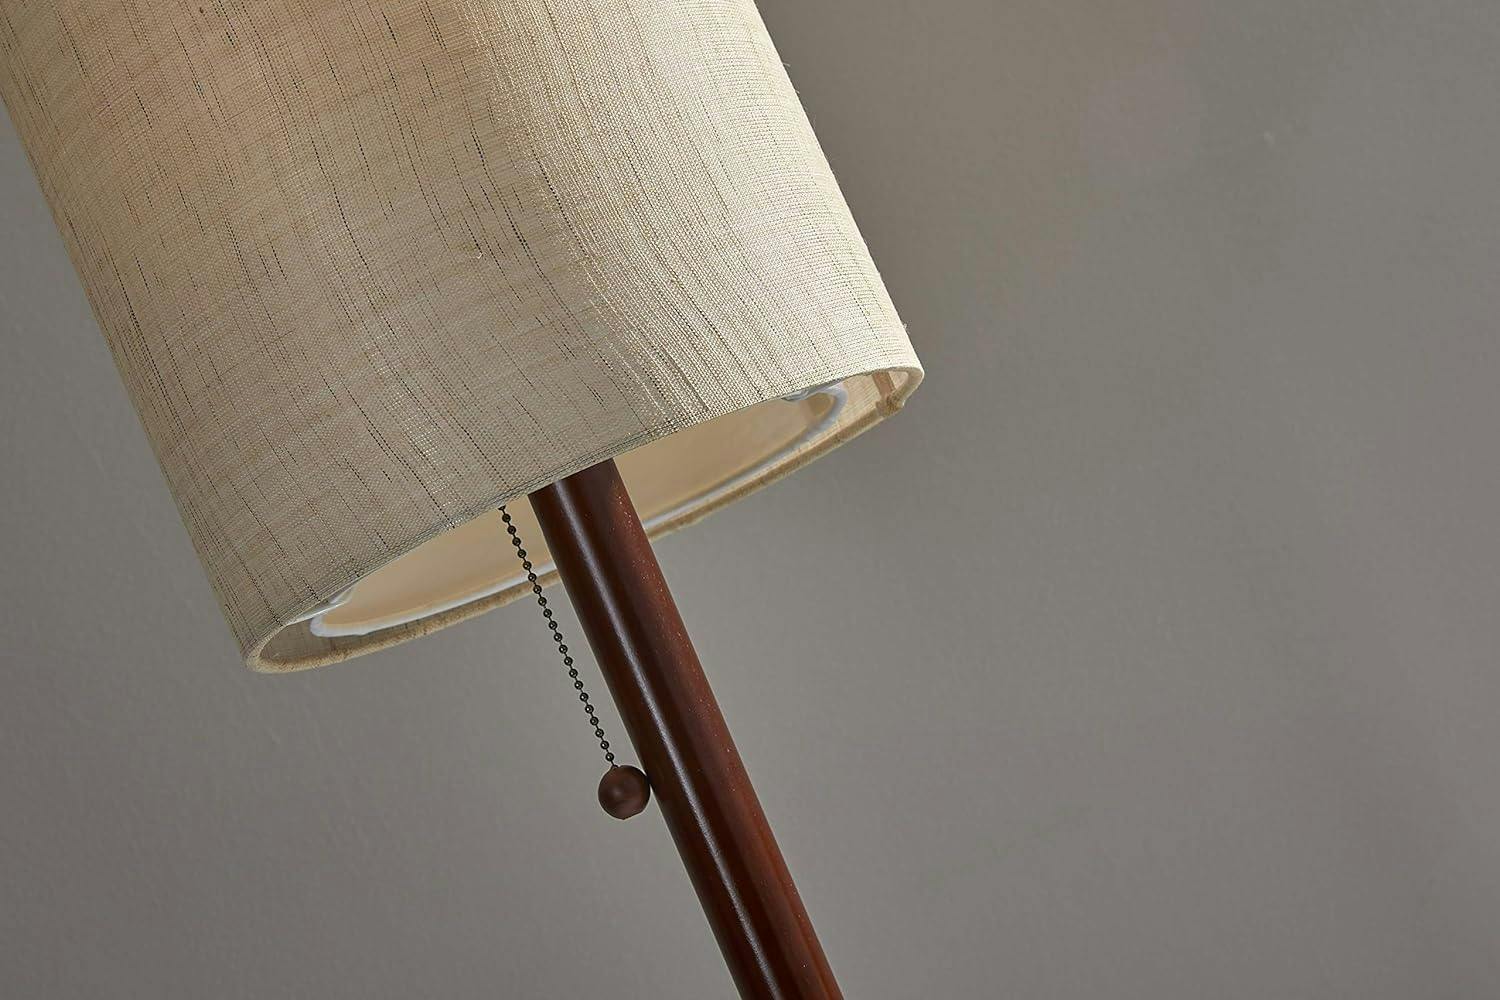 Hamptons Inspired Walnut Floor Lamp with Double Cylinder Shade